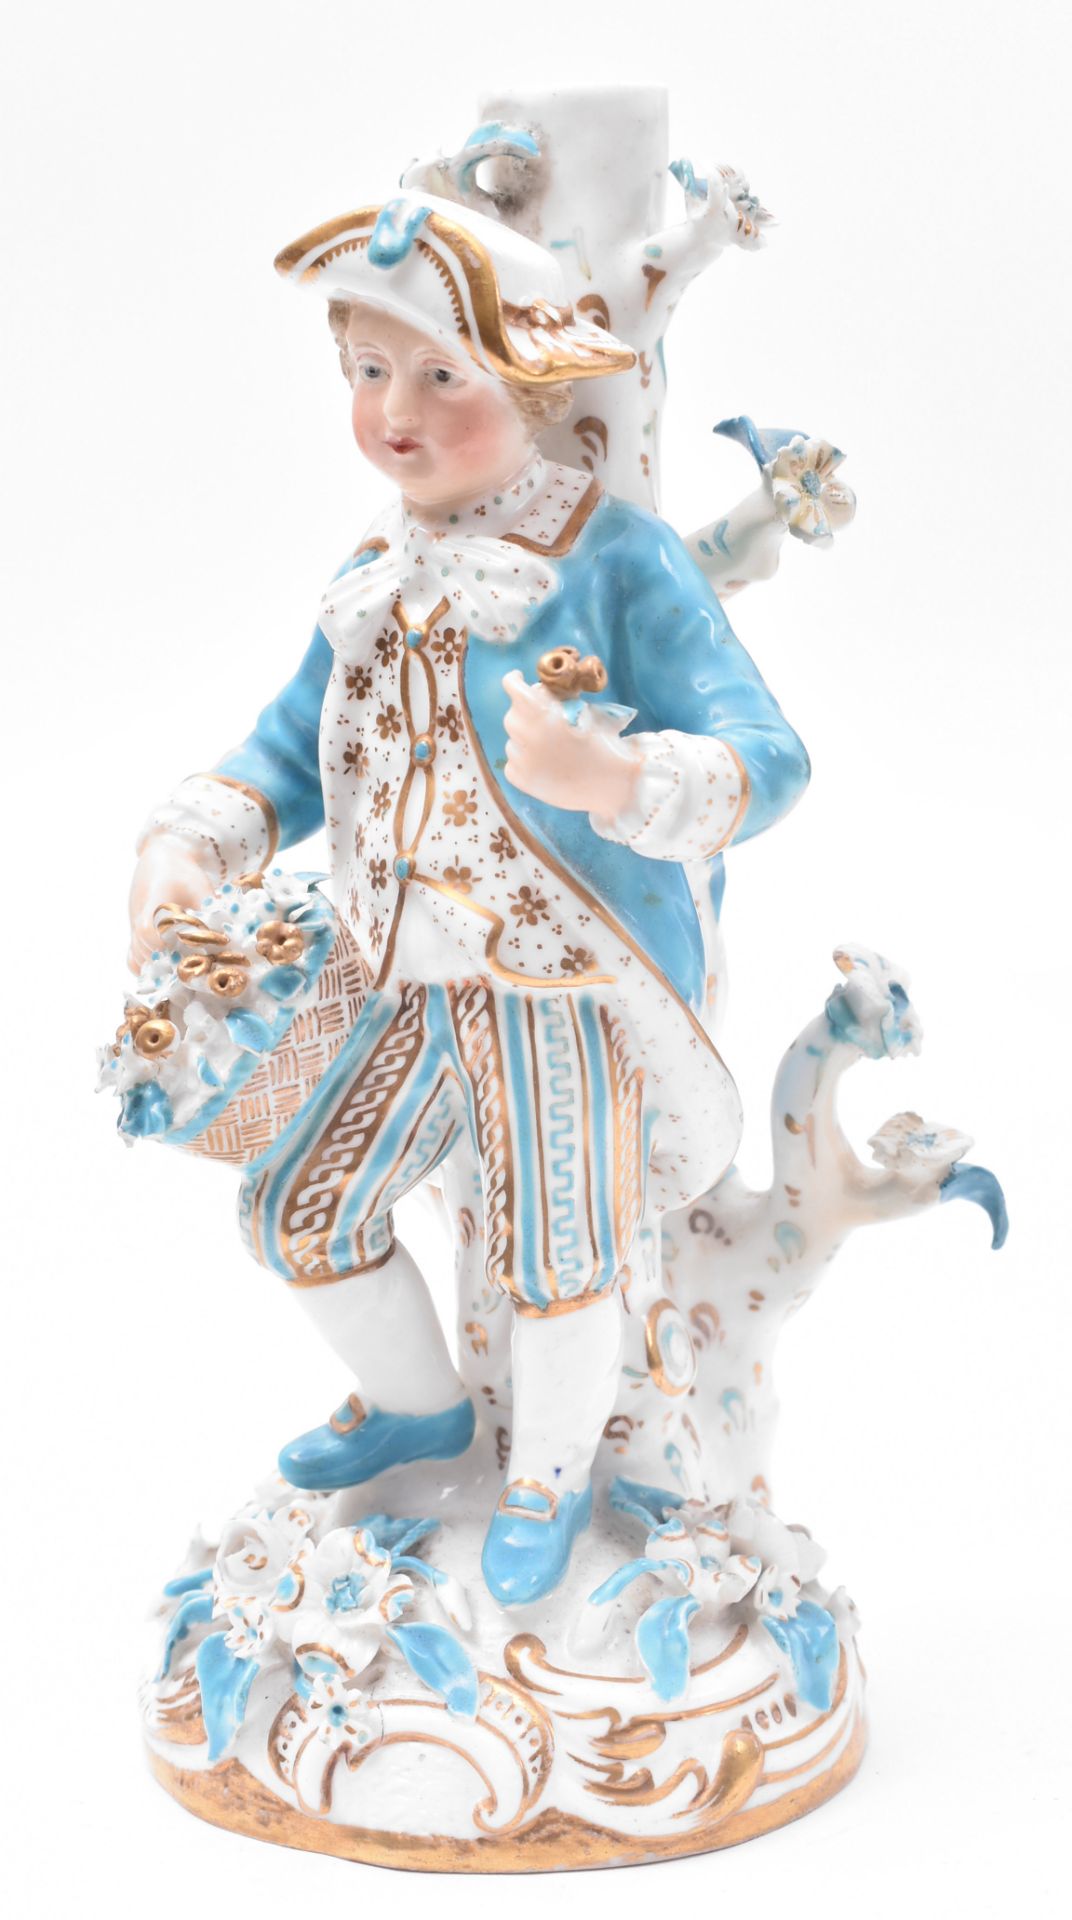 EARLY 19TH CENTURY CONTINENTAL GERMAN PORCELAIN FIGURE